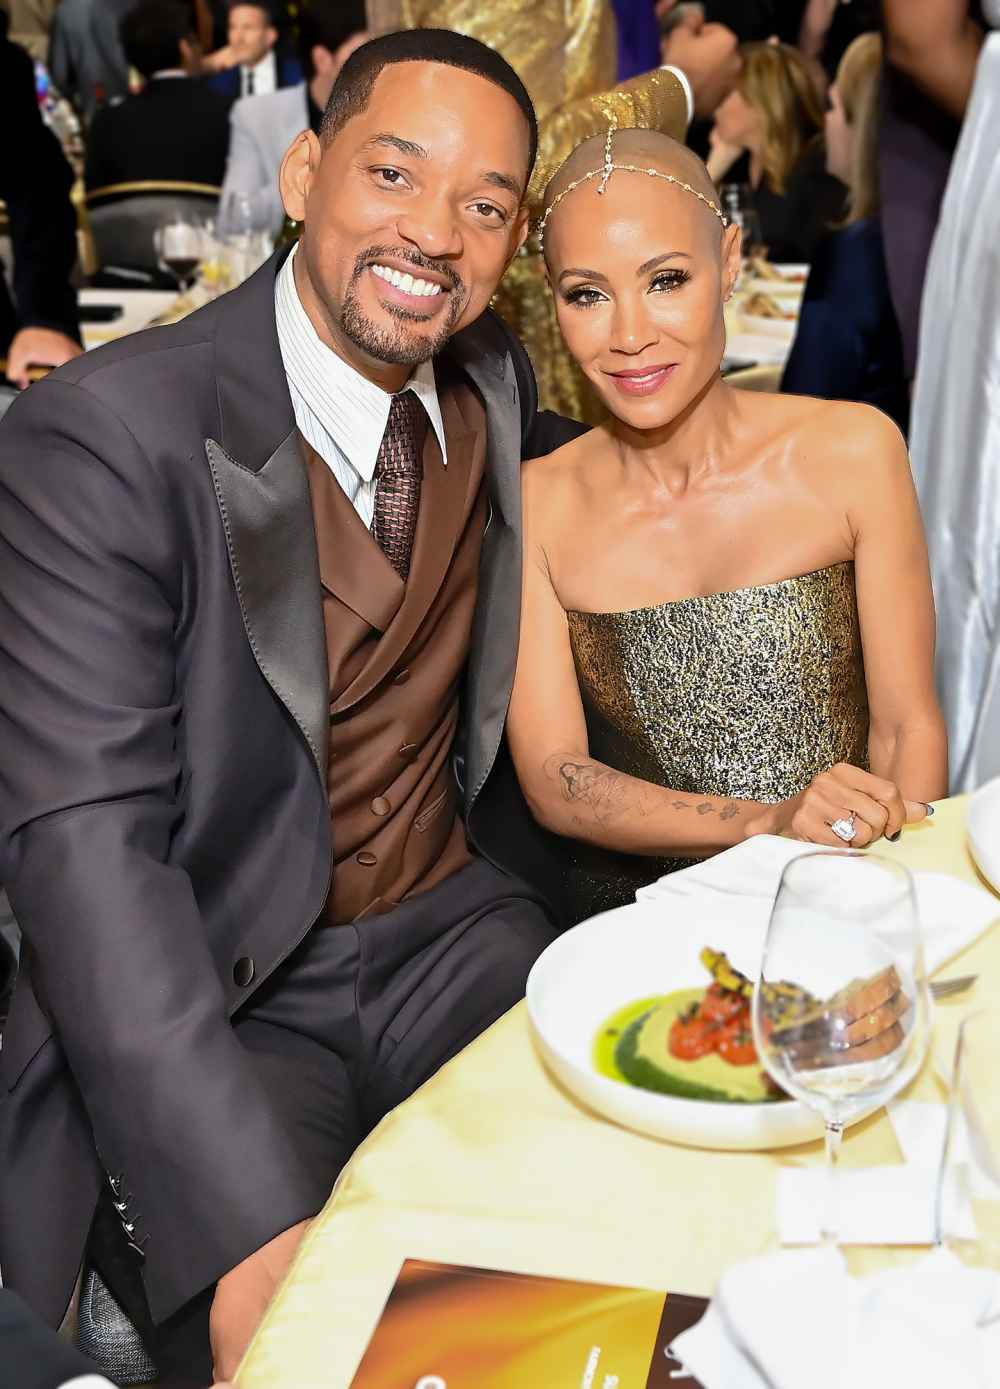 What Is Going on With Jada Pinkett Smith and Will Smith? Jada Says There's 'No Divorce on Paper'